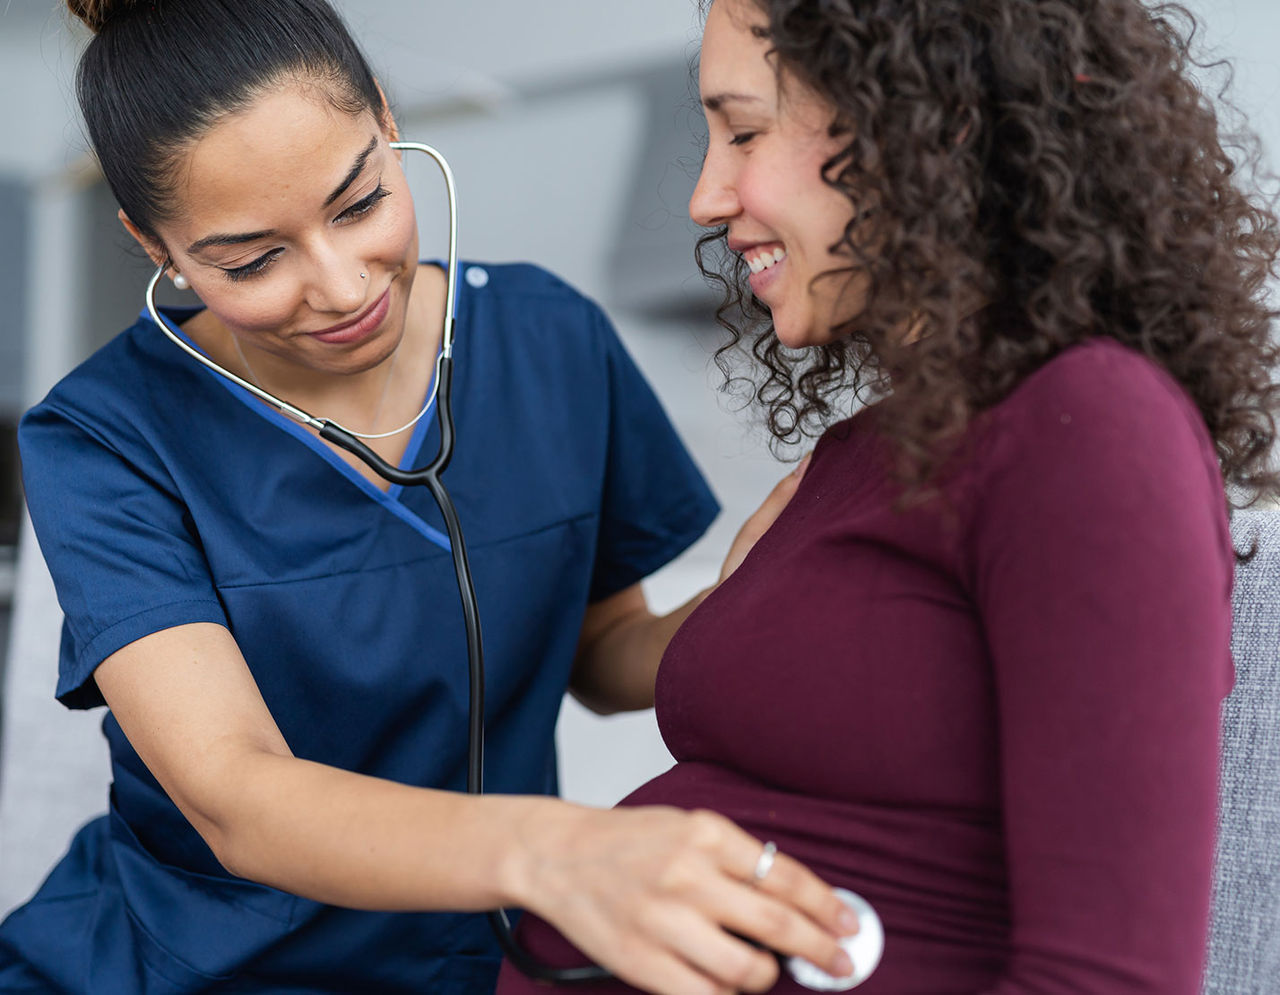 A nurse listens to a pregnant woman's stomach with a stethoscope.